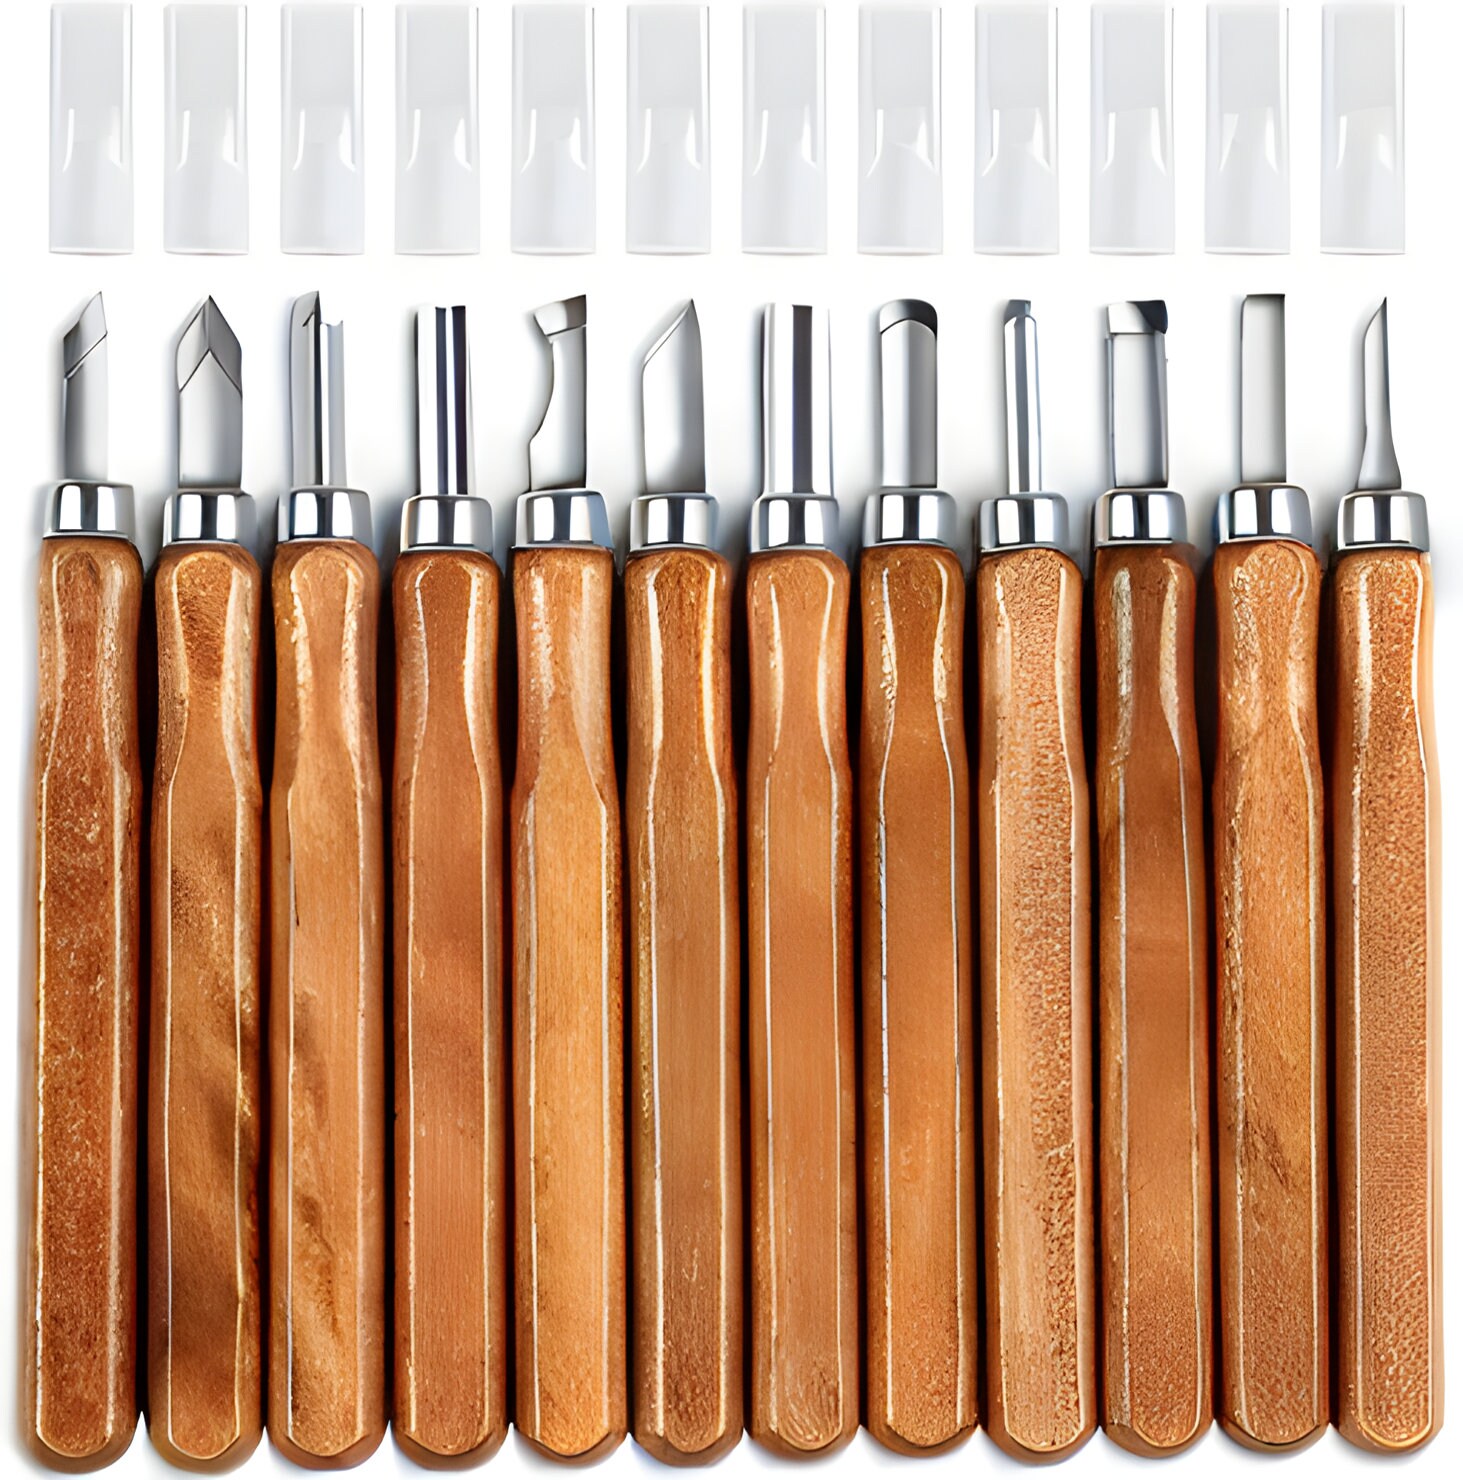 Set of 5 Carving Knives - Diefenbacher Tools